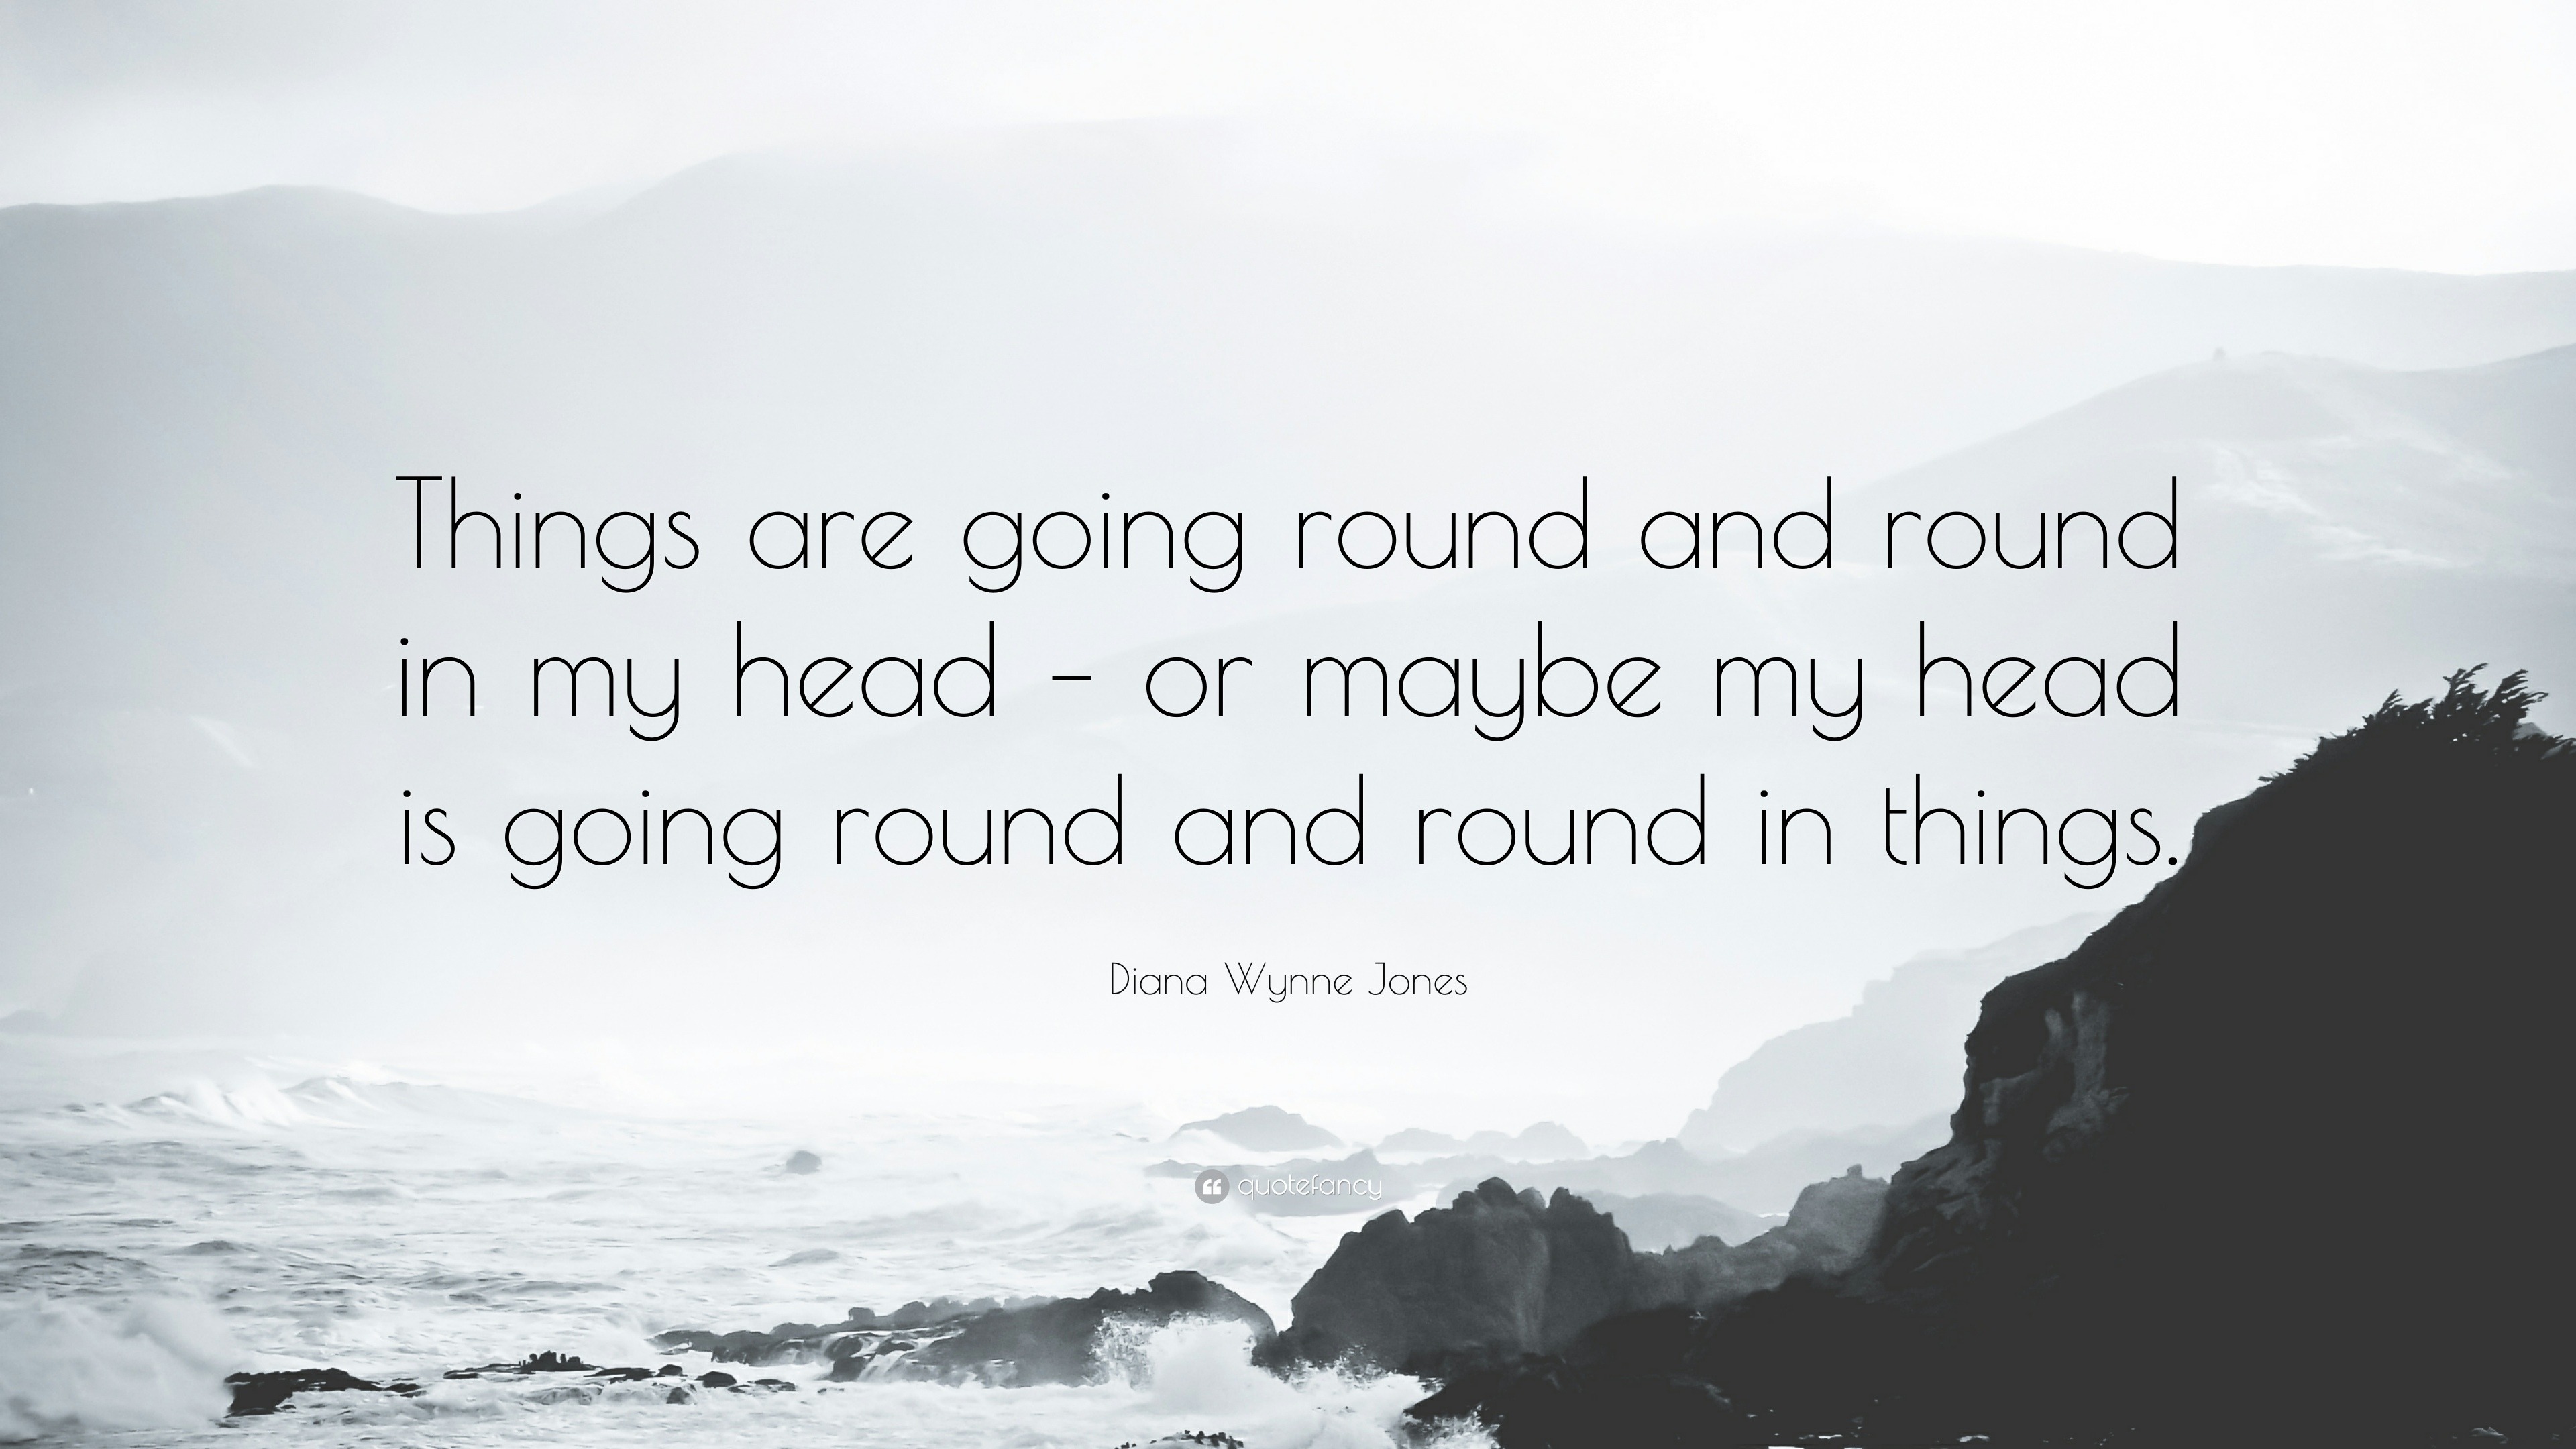 Diana Wynne Jones Quote Things Are Going Round And Round In My Head Or Maybe My Head Is Going Round And Round In Things 7 Wallpapers Quotefancy